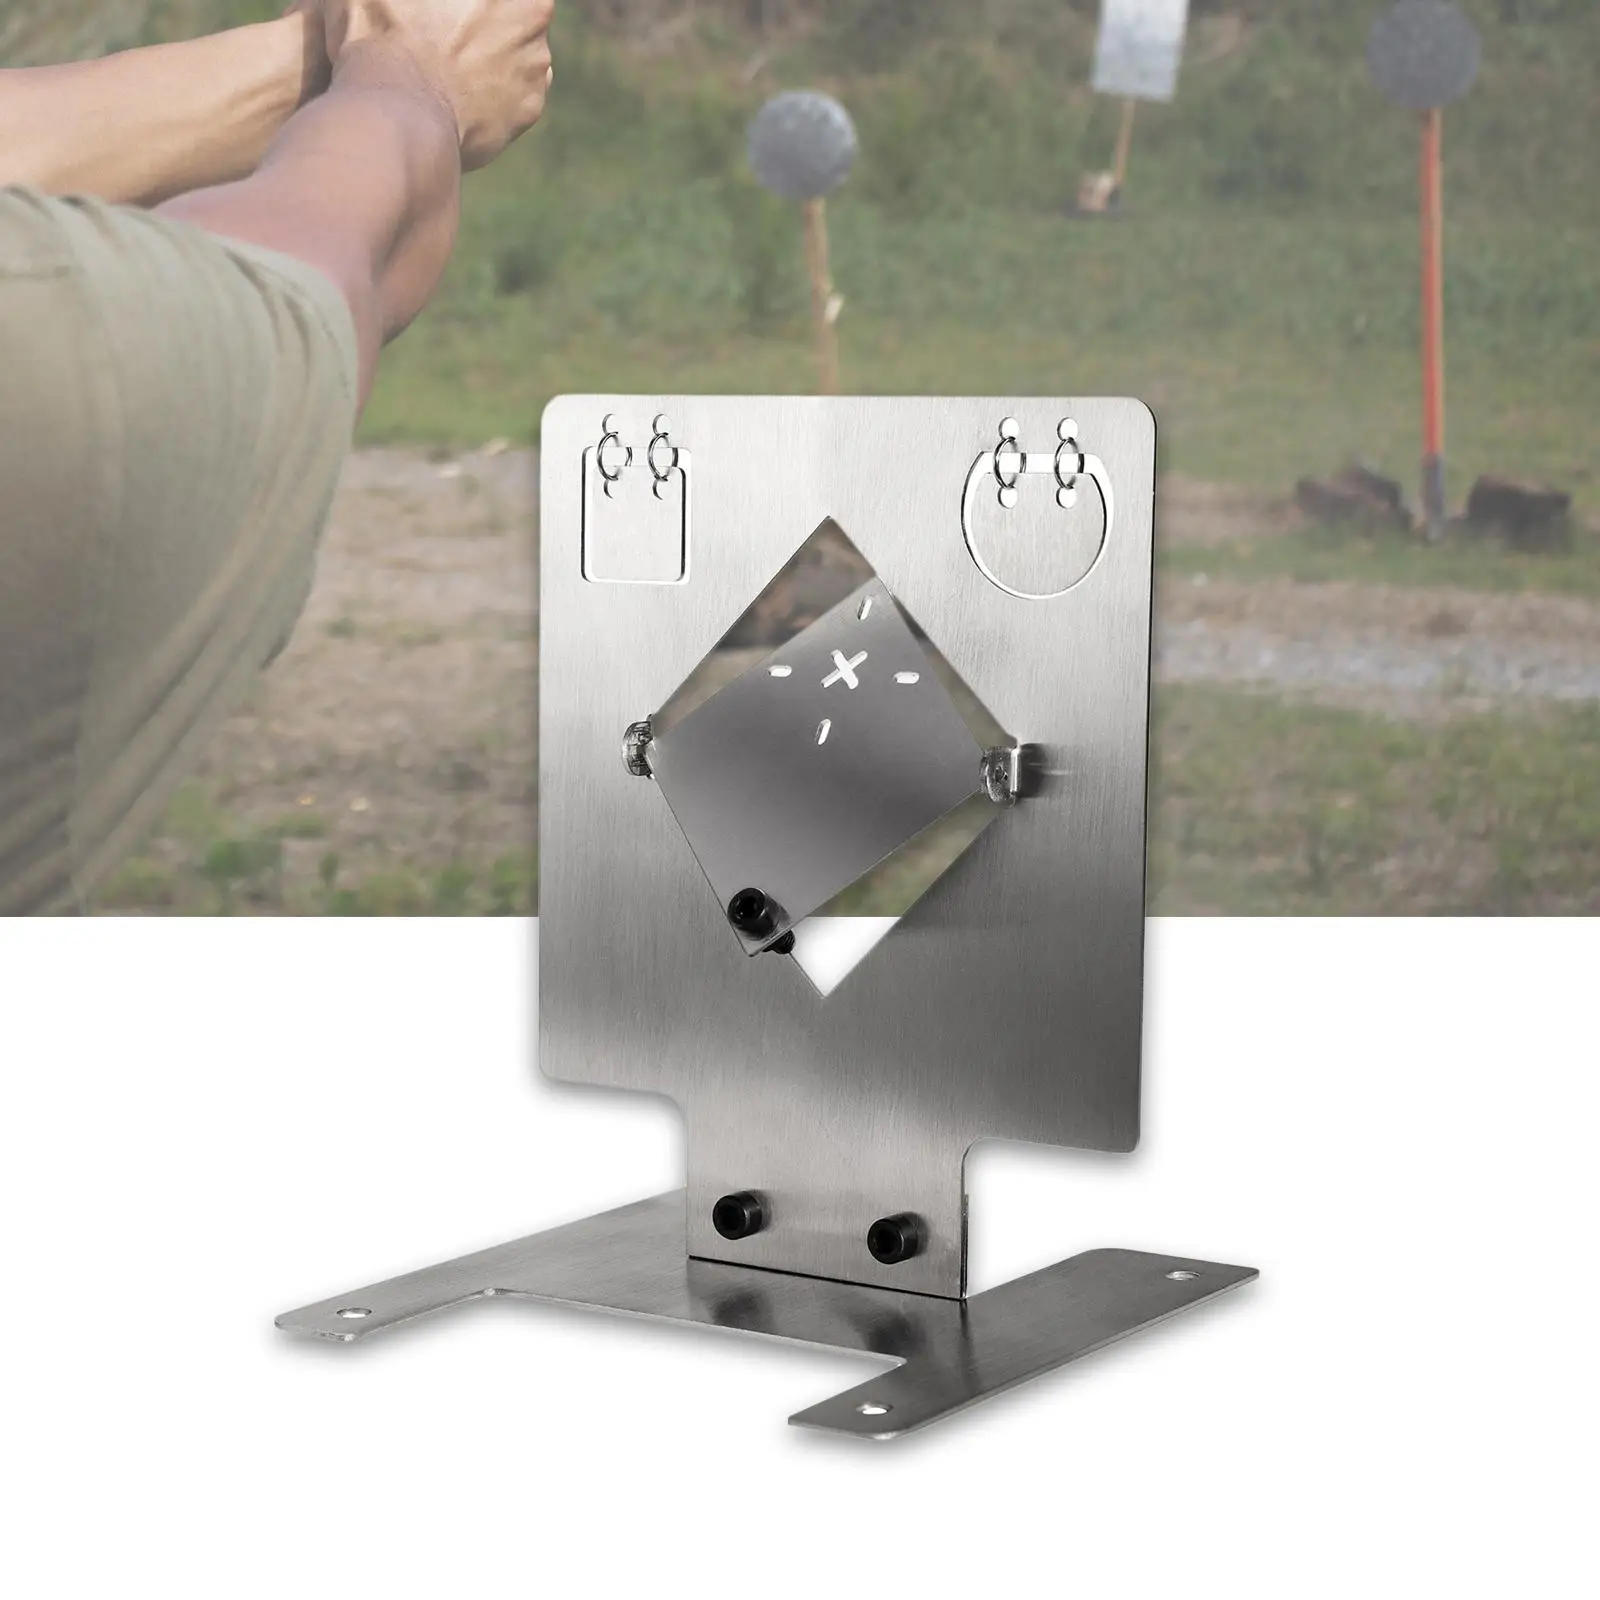 Metal Target Stand Hunting Training Practice Target with Hanging Design Strong Stable Stainless Steel Target